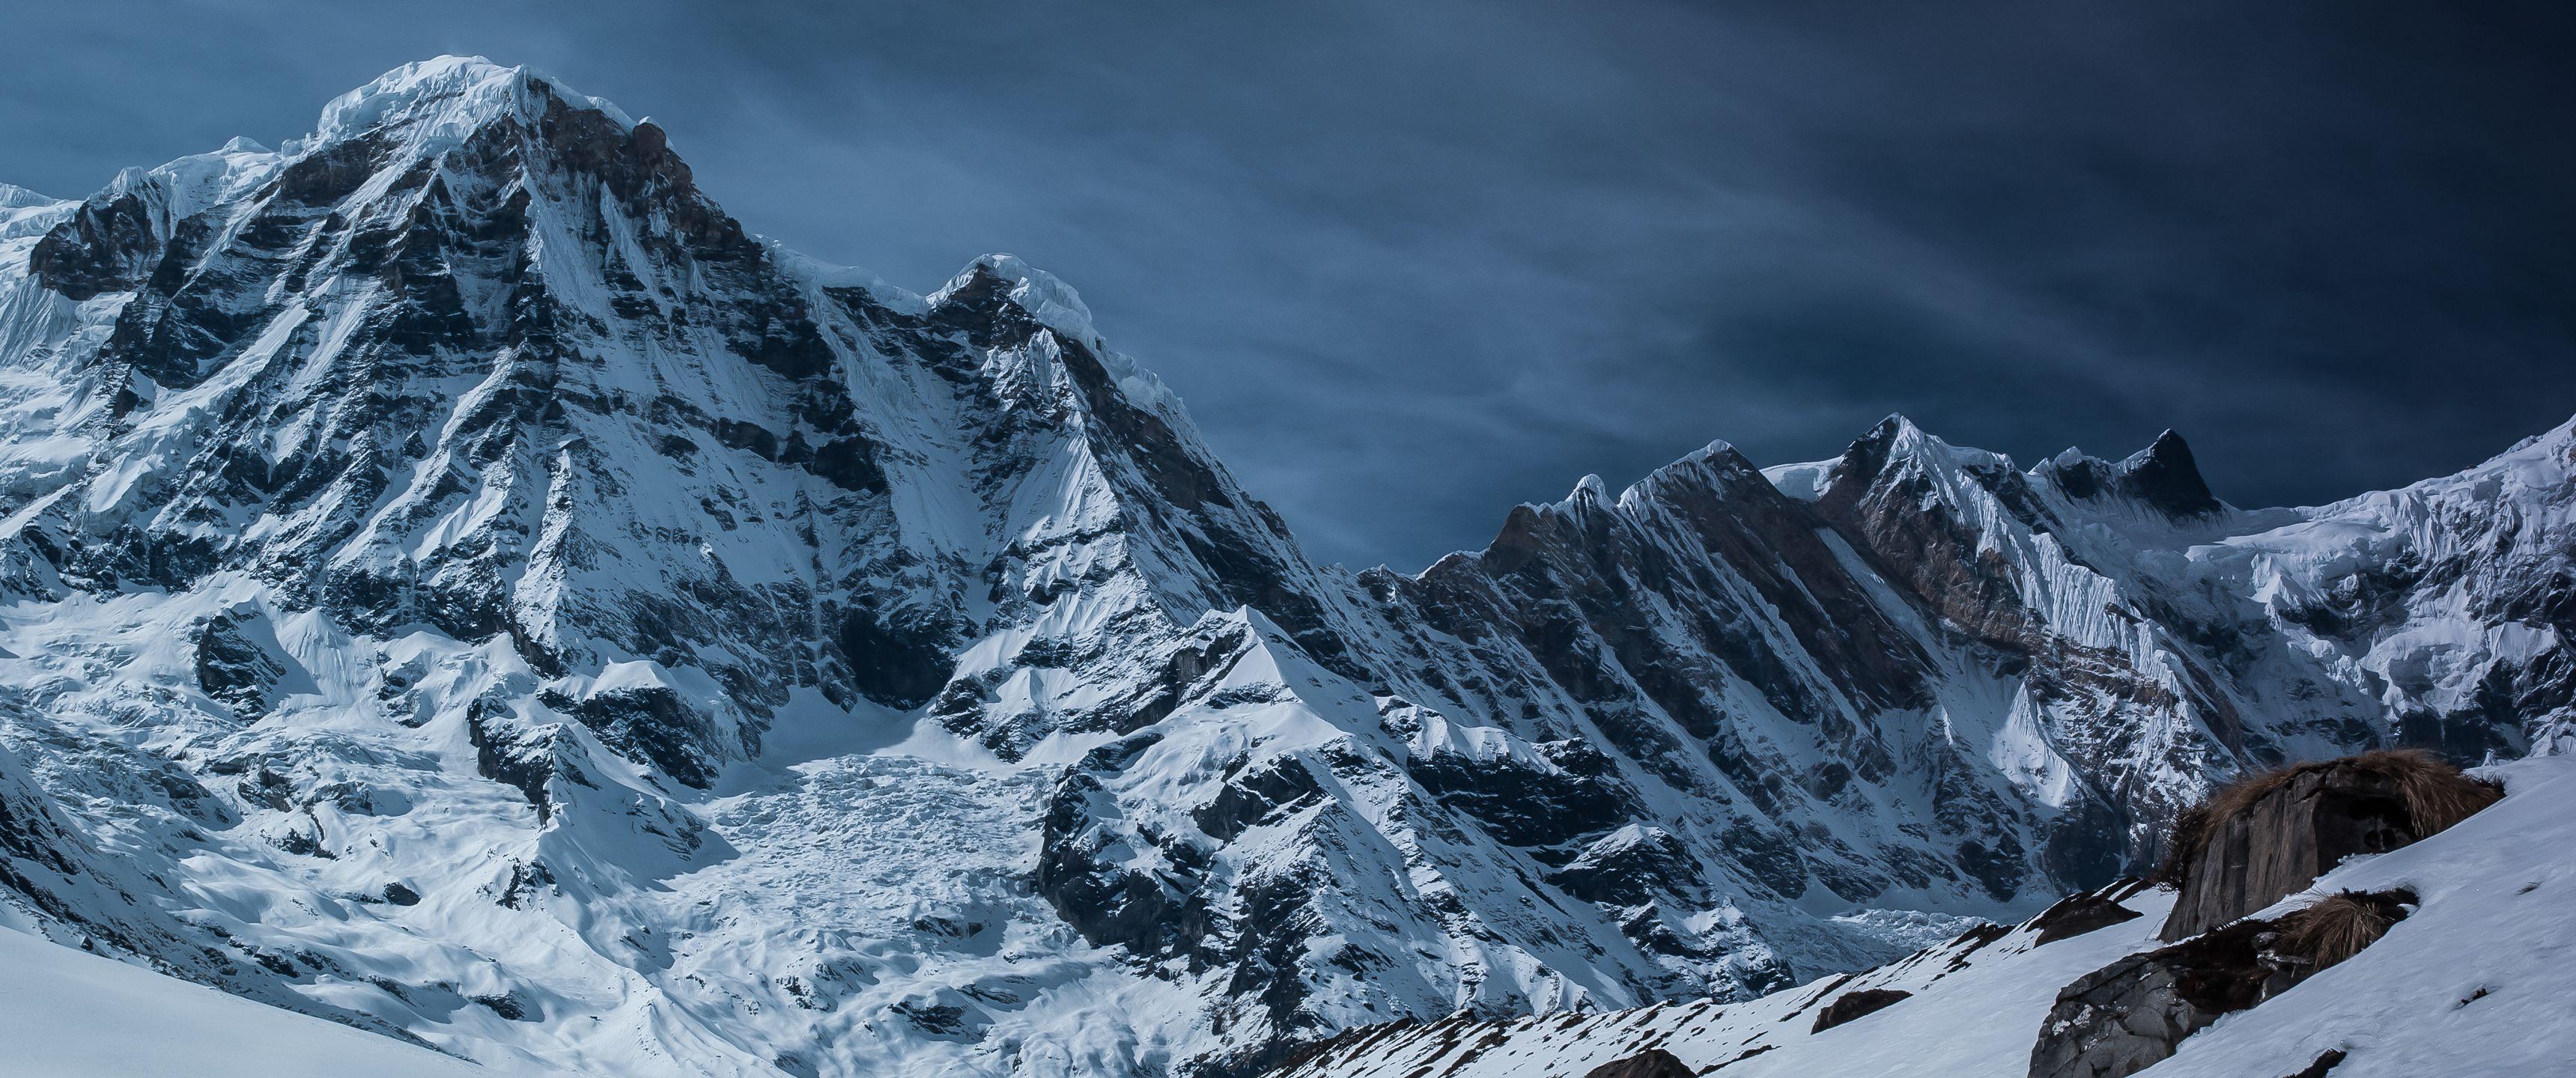 Snow Covered Mountains:9 Ultrawide HD Wallpaper (3440x1440). Picture, Wallpaper, Stock image free